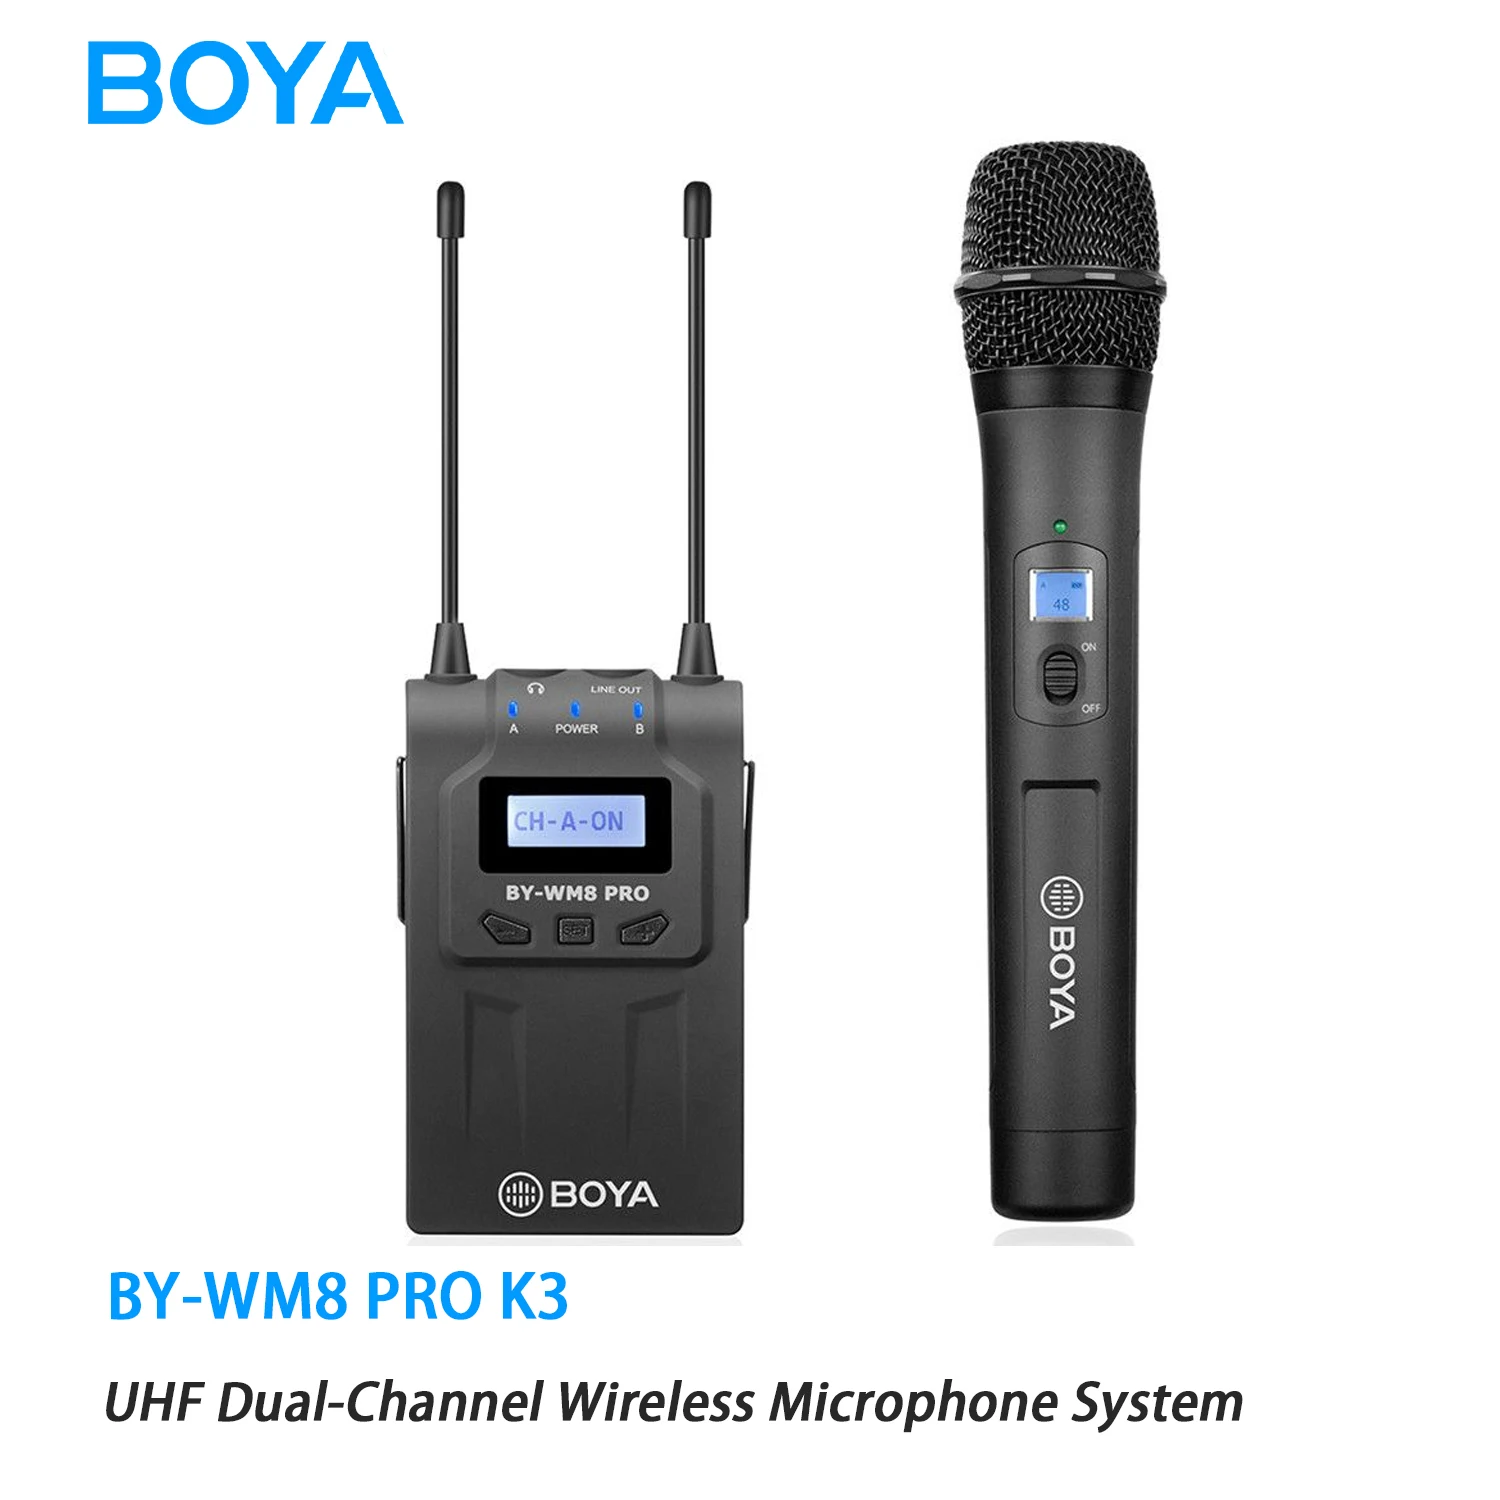 

BOYA BY-WM8 PRO K3 UHF Dual-Channel Condenser Wireless Handheld Microphone for PC Smartphone Camera Interview Streaming Youtube